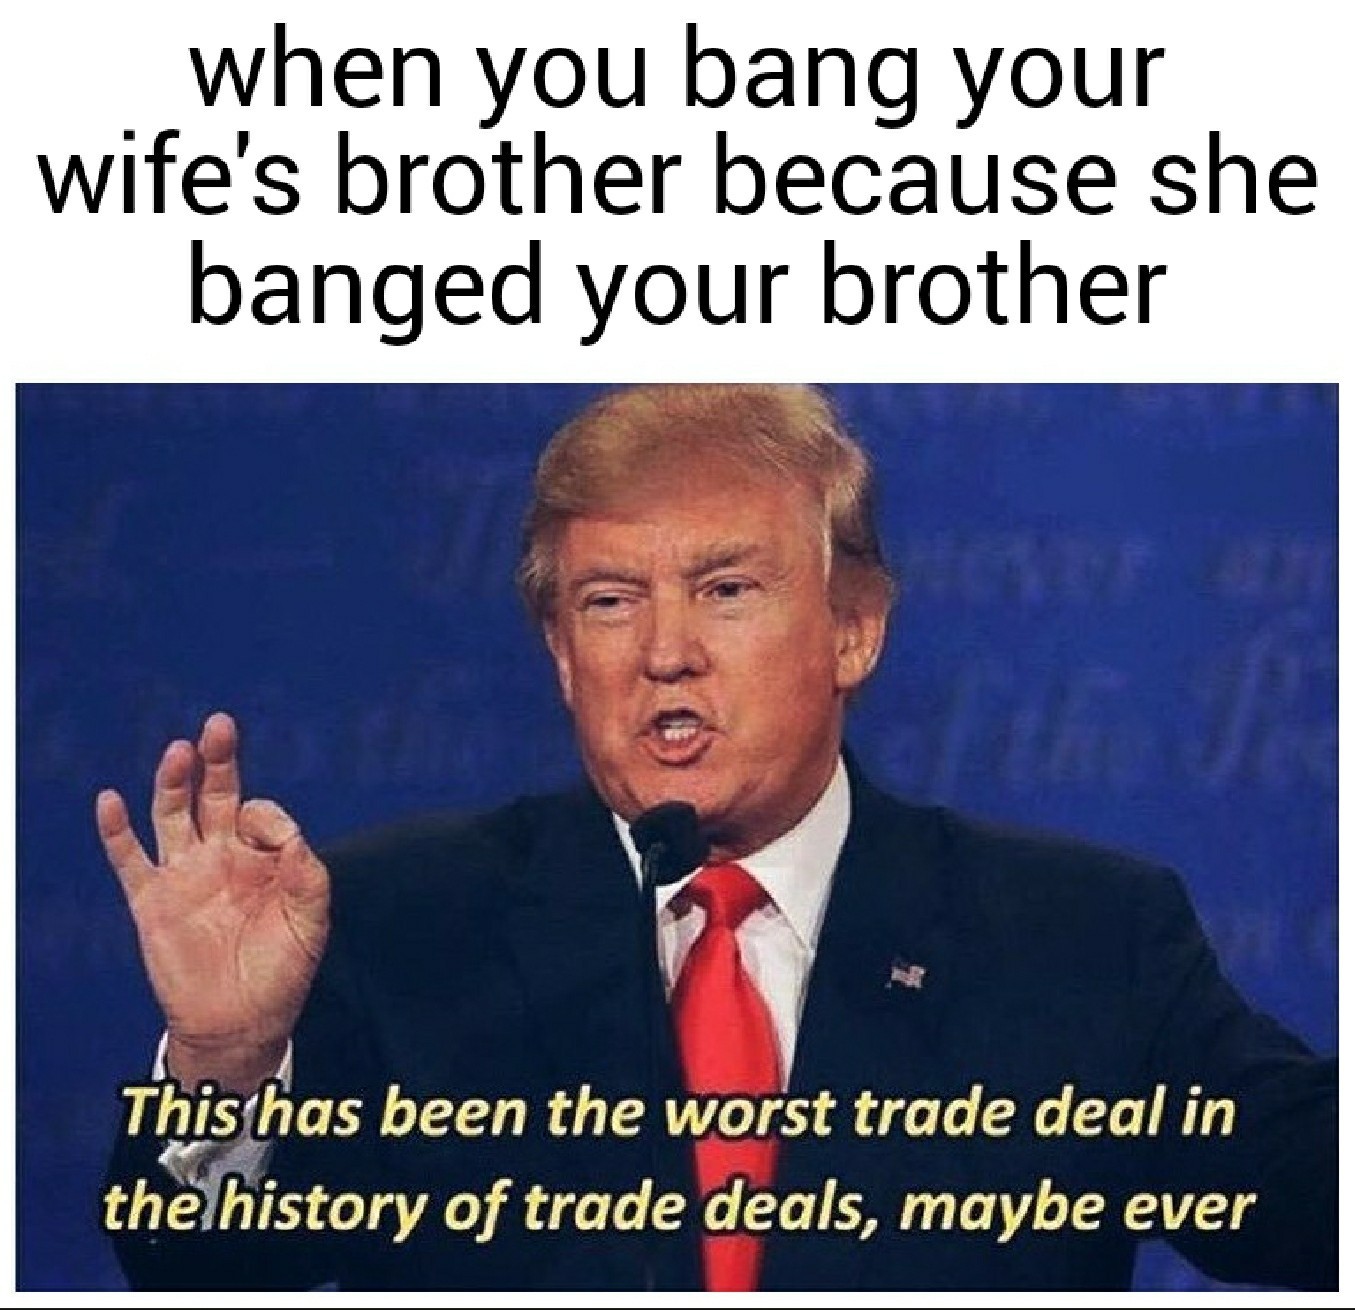 trade memes - when you bang your wife's brother because she banged your brother This has been the worst trade deal in the history of trade deals, maybe ever